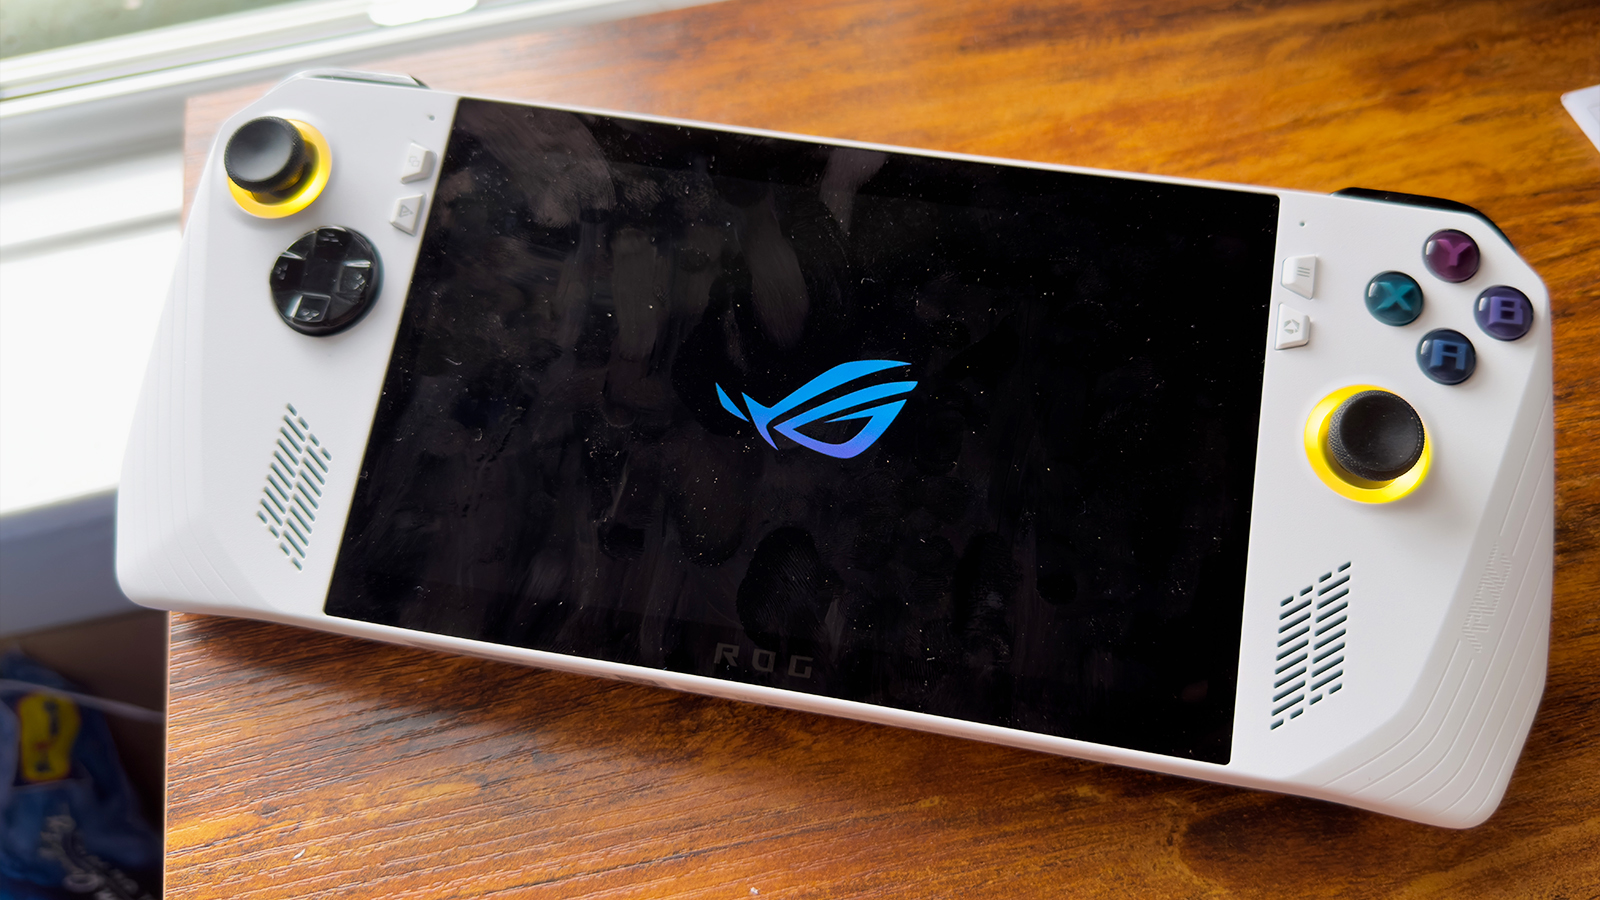 Asus ROG Ally: Price, specs, game library and more